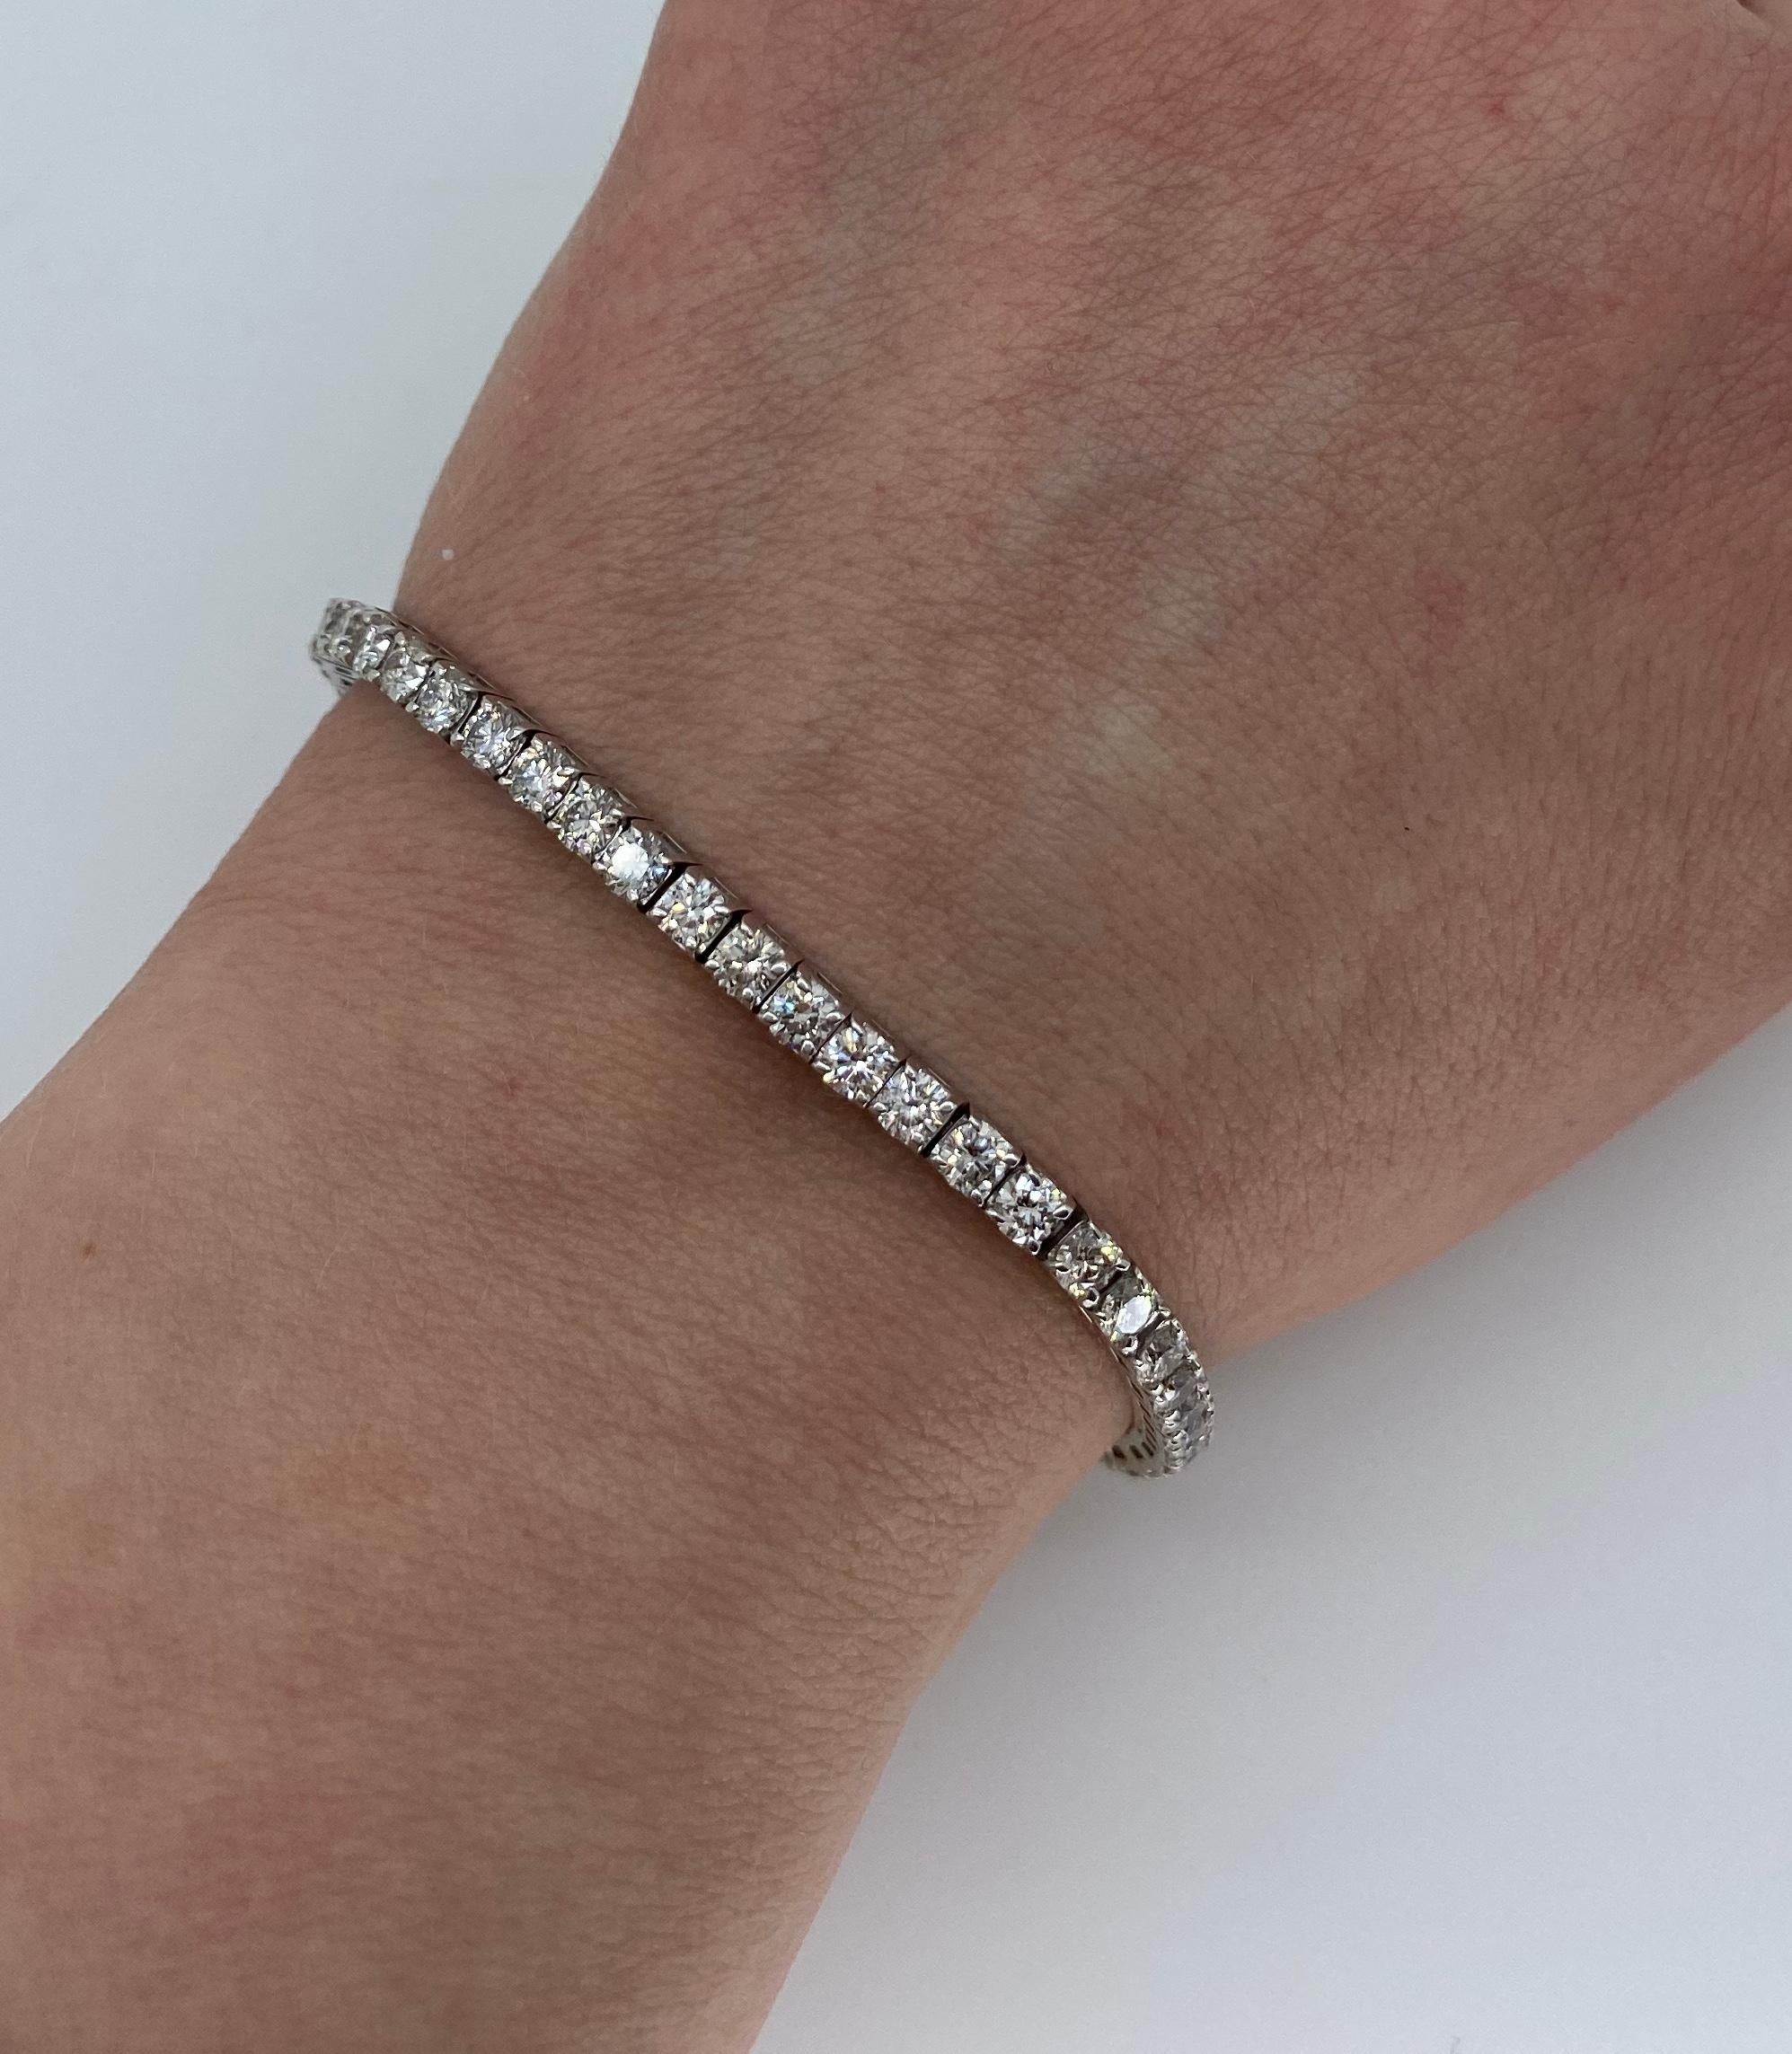 Approximately 6.75CTW diamond tennis bracelet crafted in 14k white gold.

Diamond Carat Weight: Approximately 6.75CTW
Diamond Cut: Round Brilliant Cut 
Color: Average G-J
Clarity: Average SI-I
Metal: 14K White Gold
Marked/Tested: Stamped 